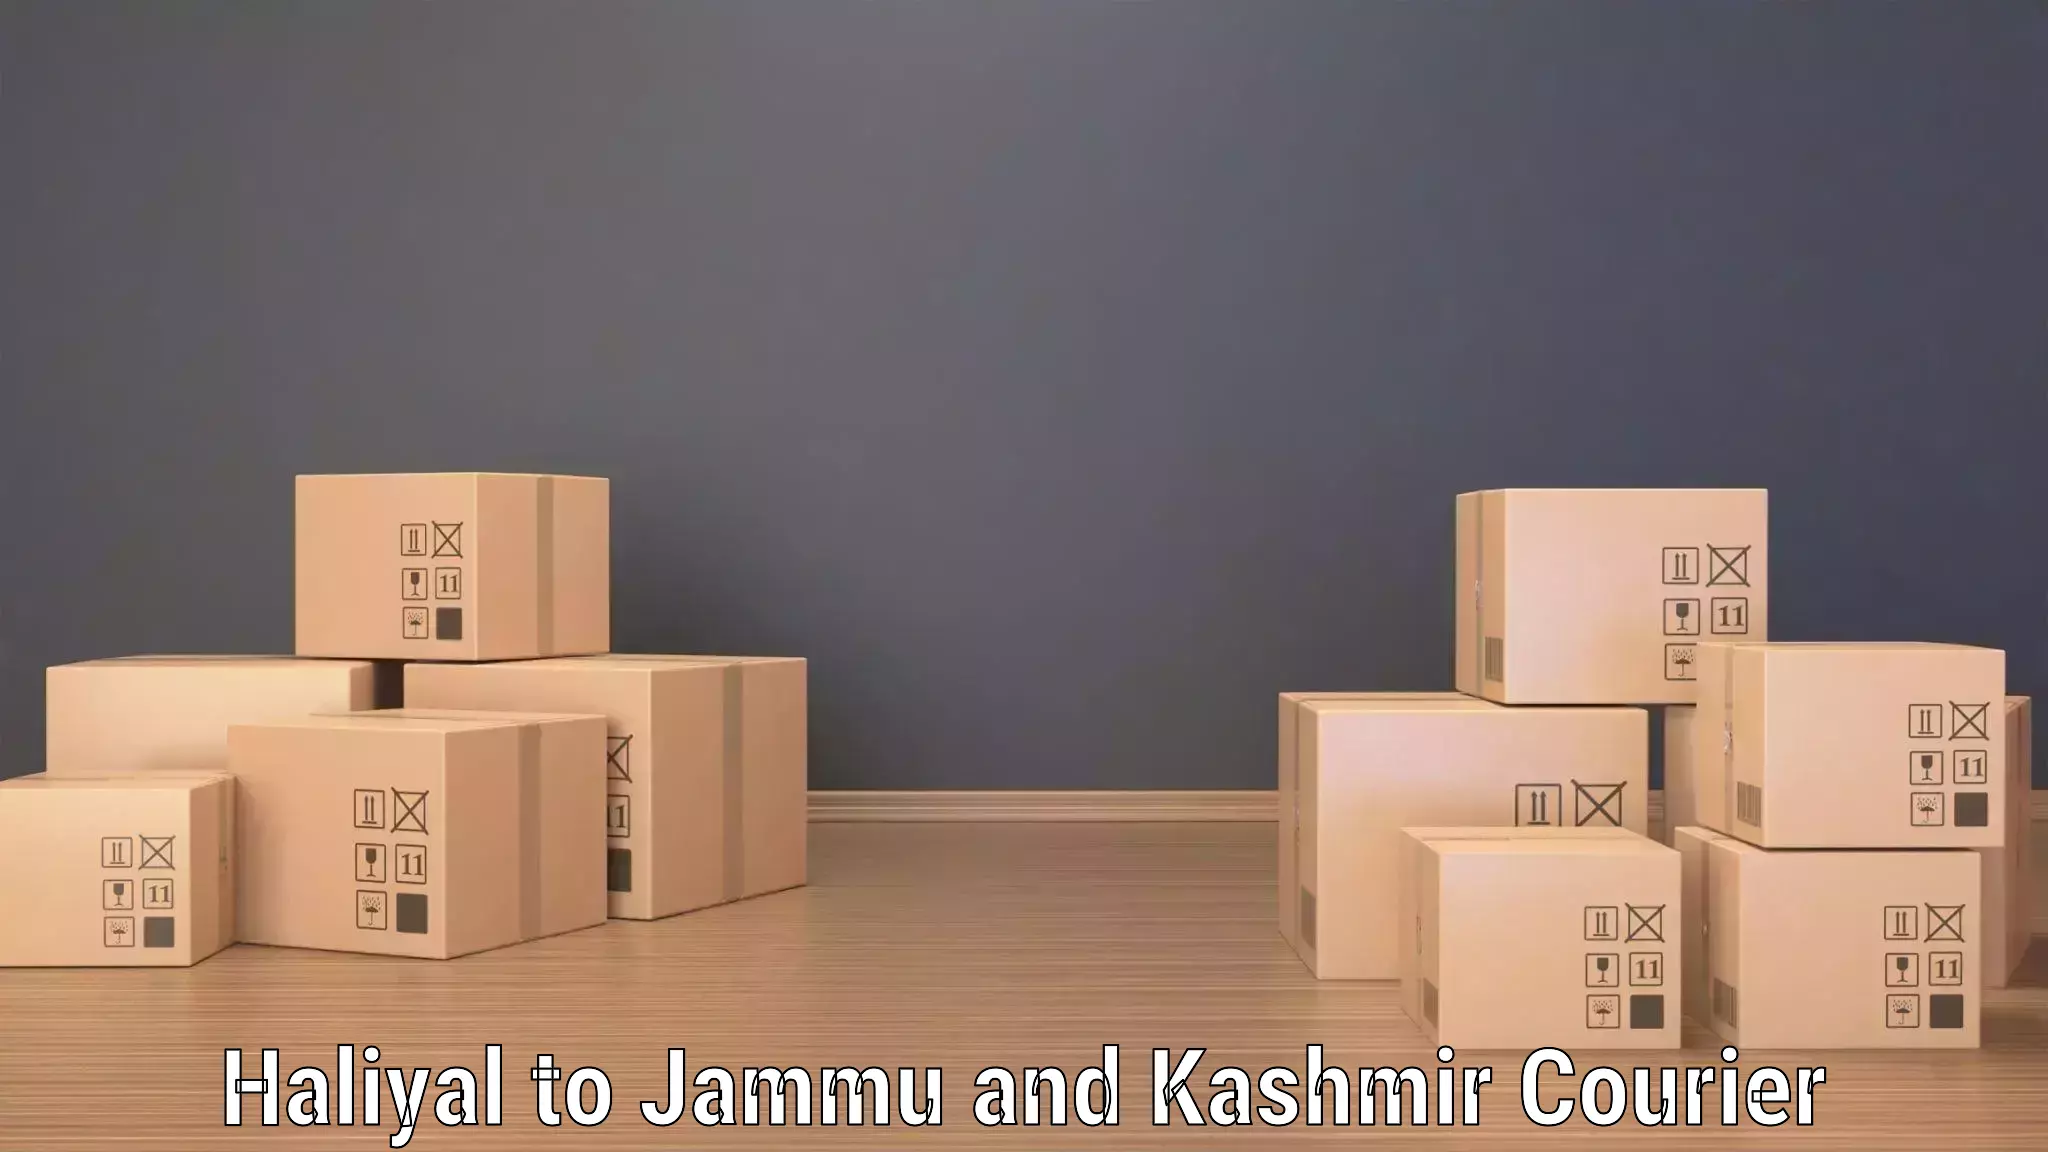 Courier service comparison in Haliyal to Budgam